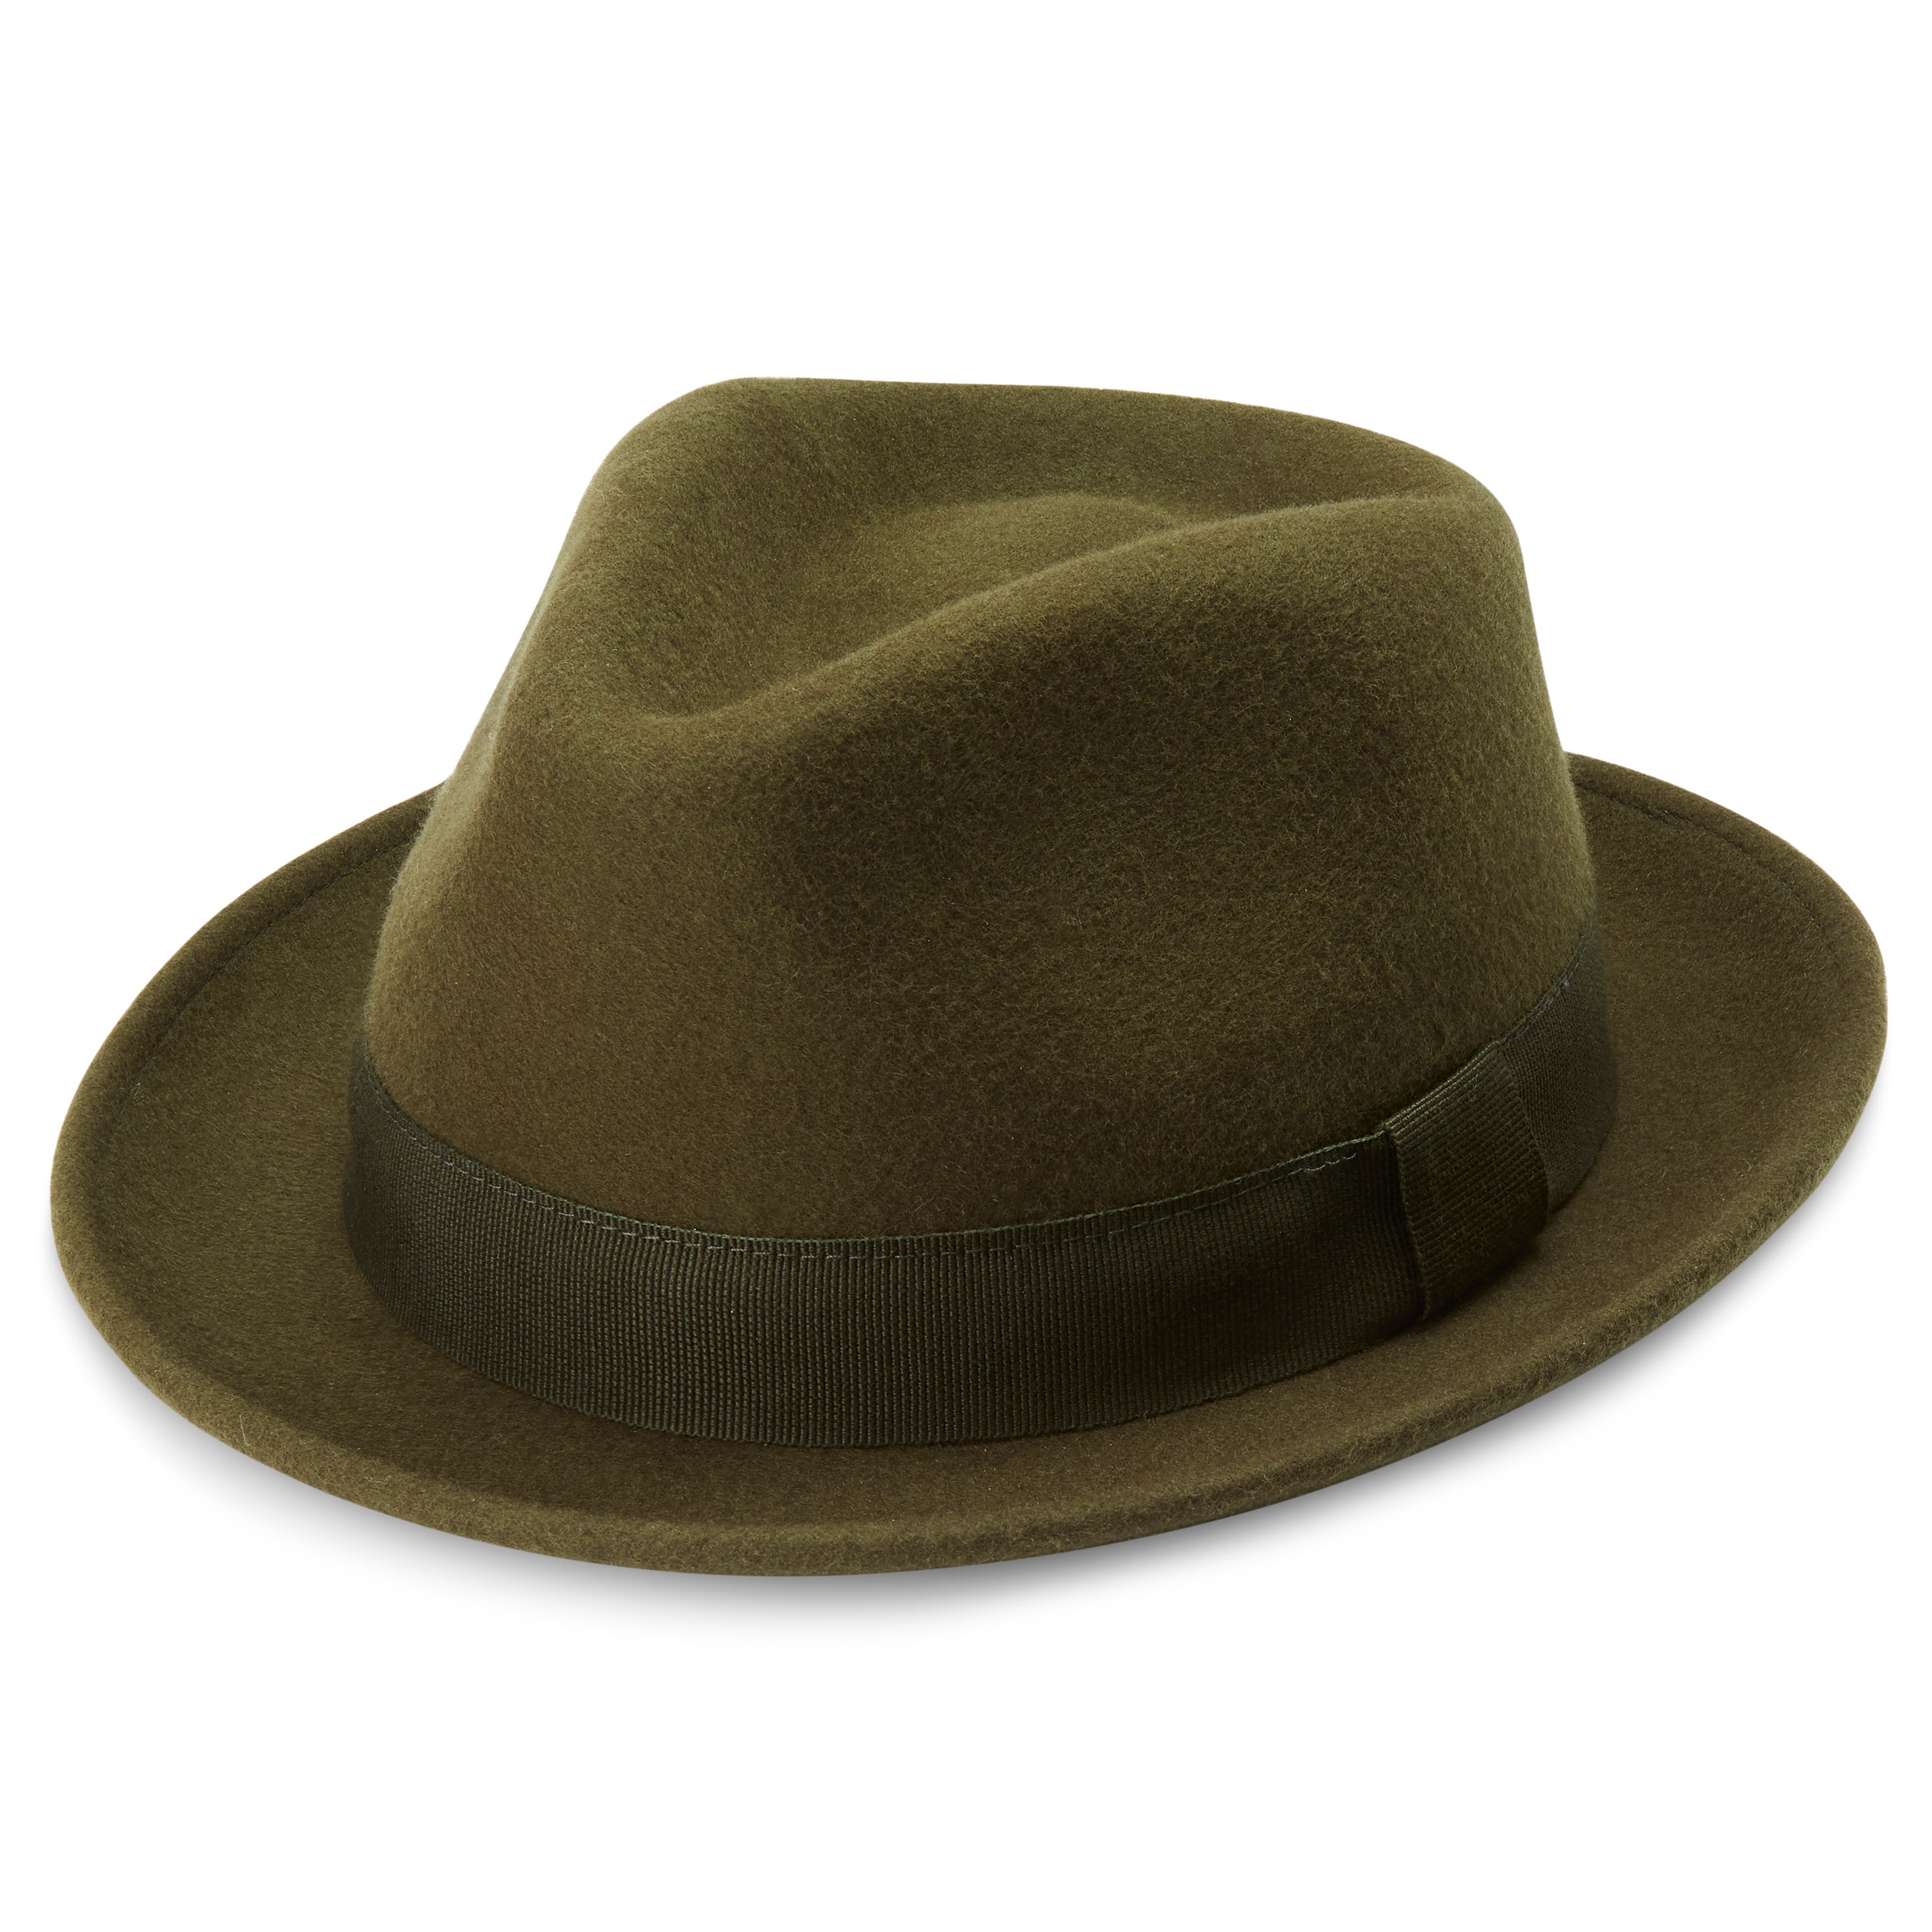 Moda, Olive Green Wool Trilby Hat, In stock!